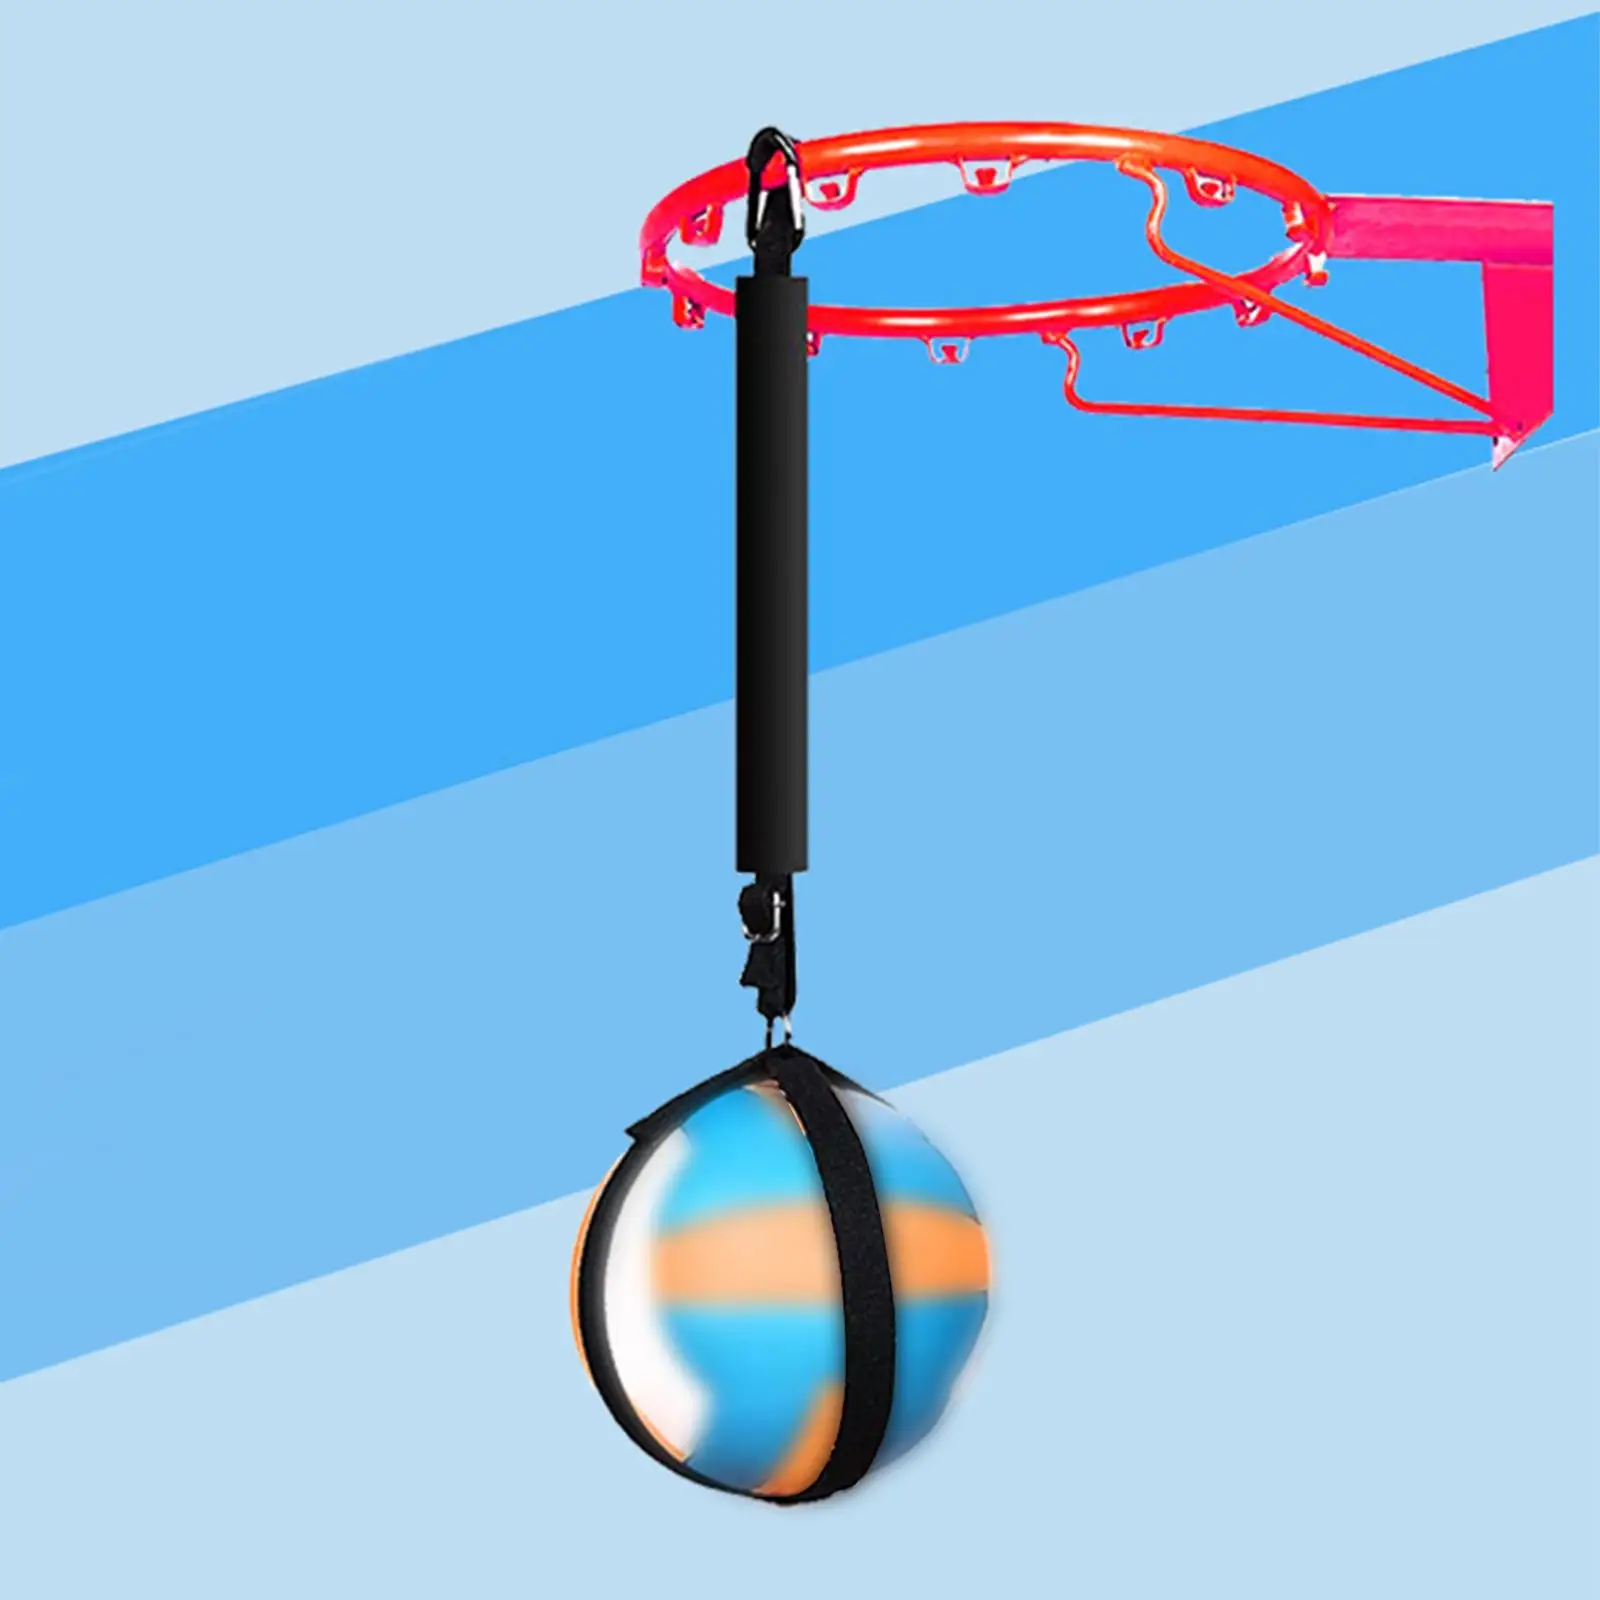 Volleyball Trainer Practice Training Equipment Improves Practicing Serving